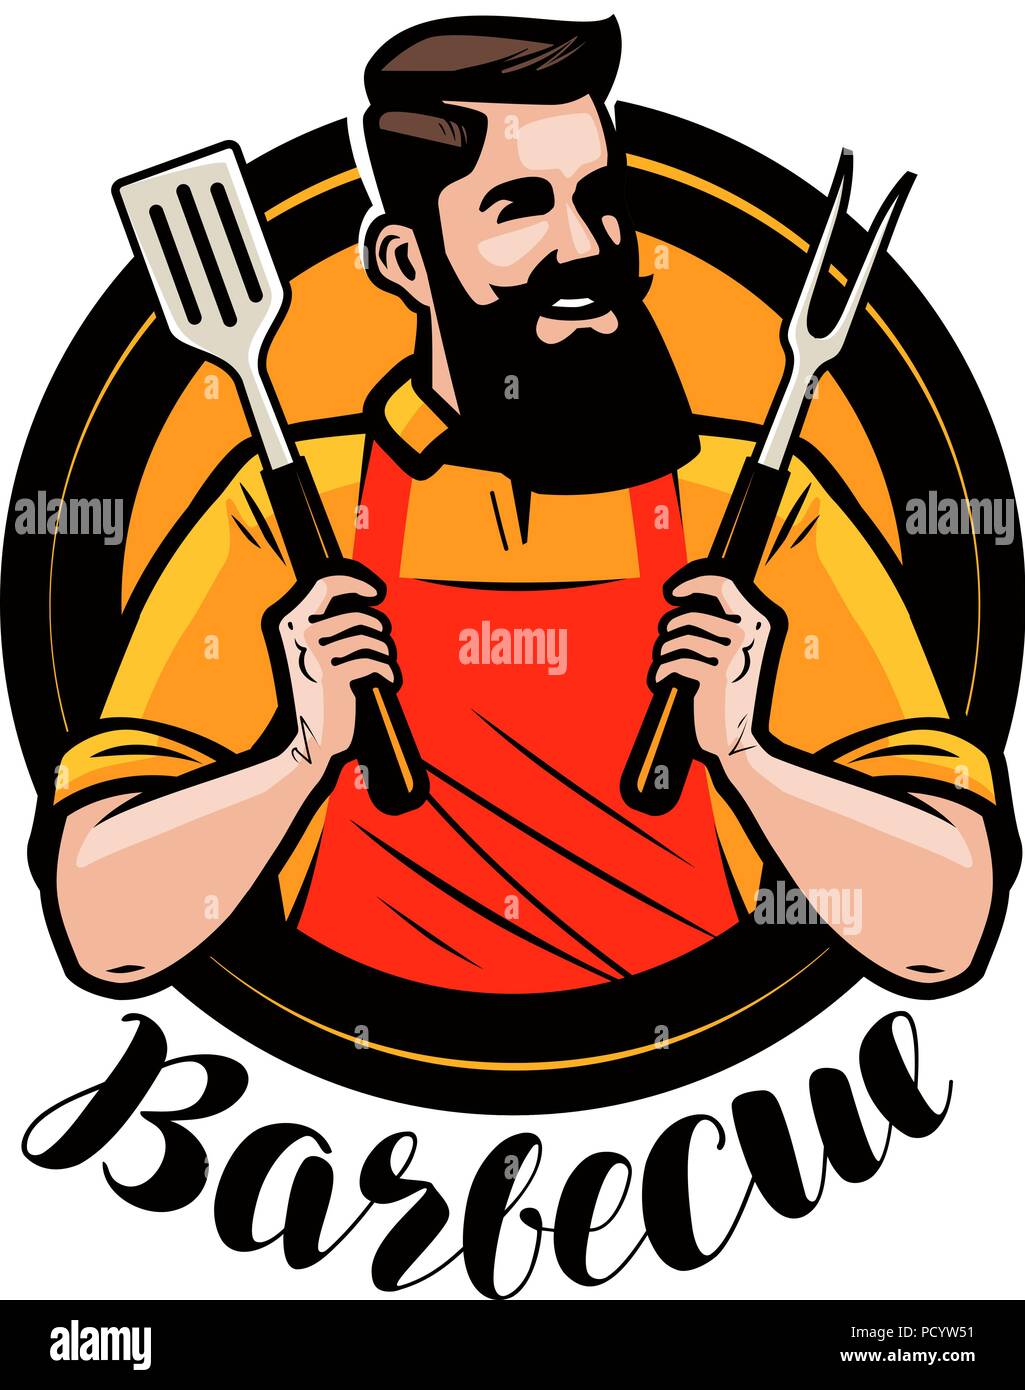 Bbq Barbecue Logo Or Label Chef Or Happy Cook Holding A Grill